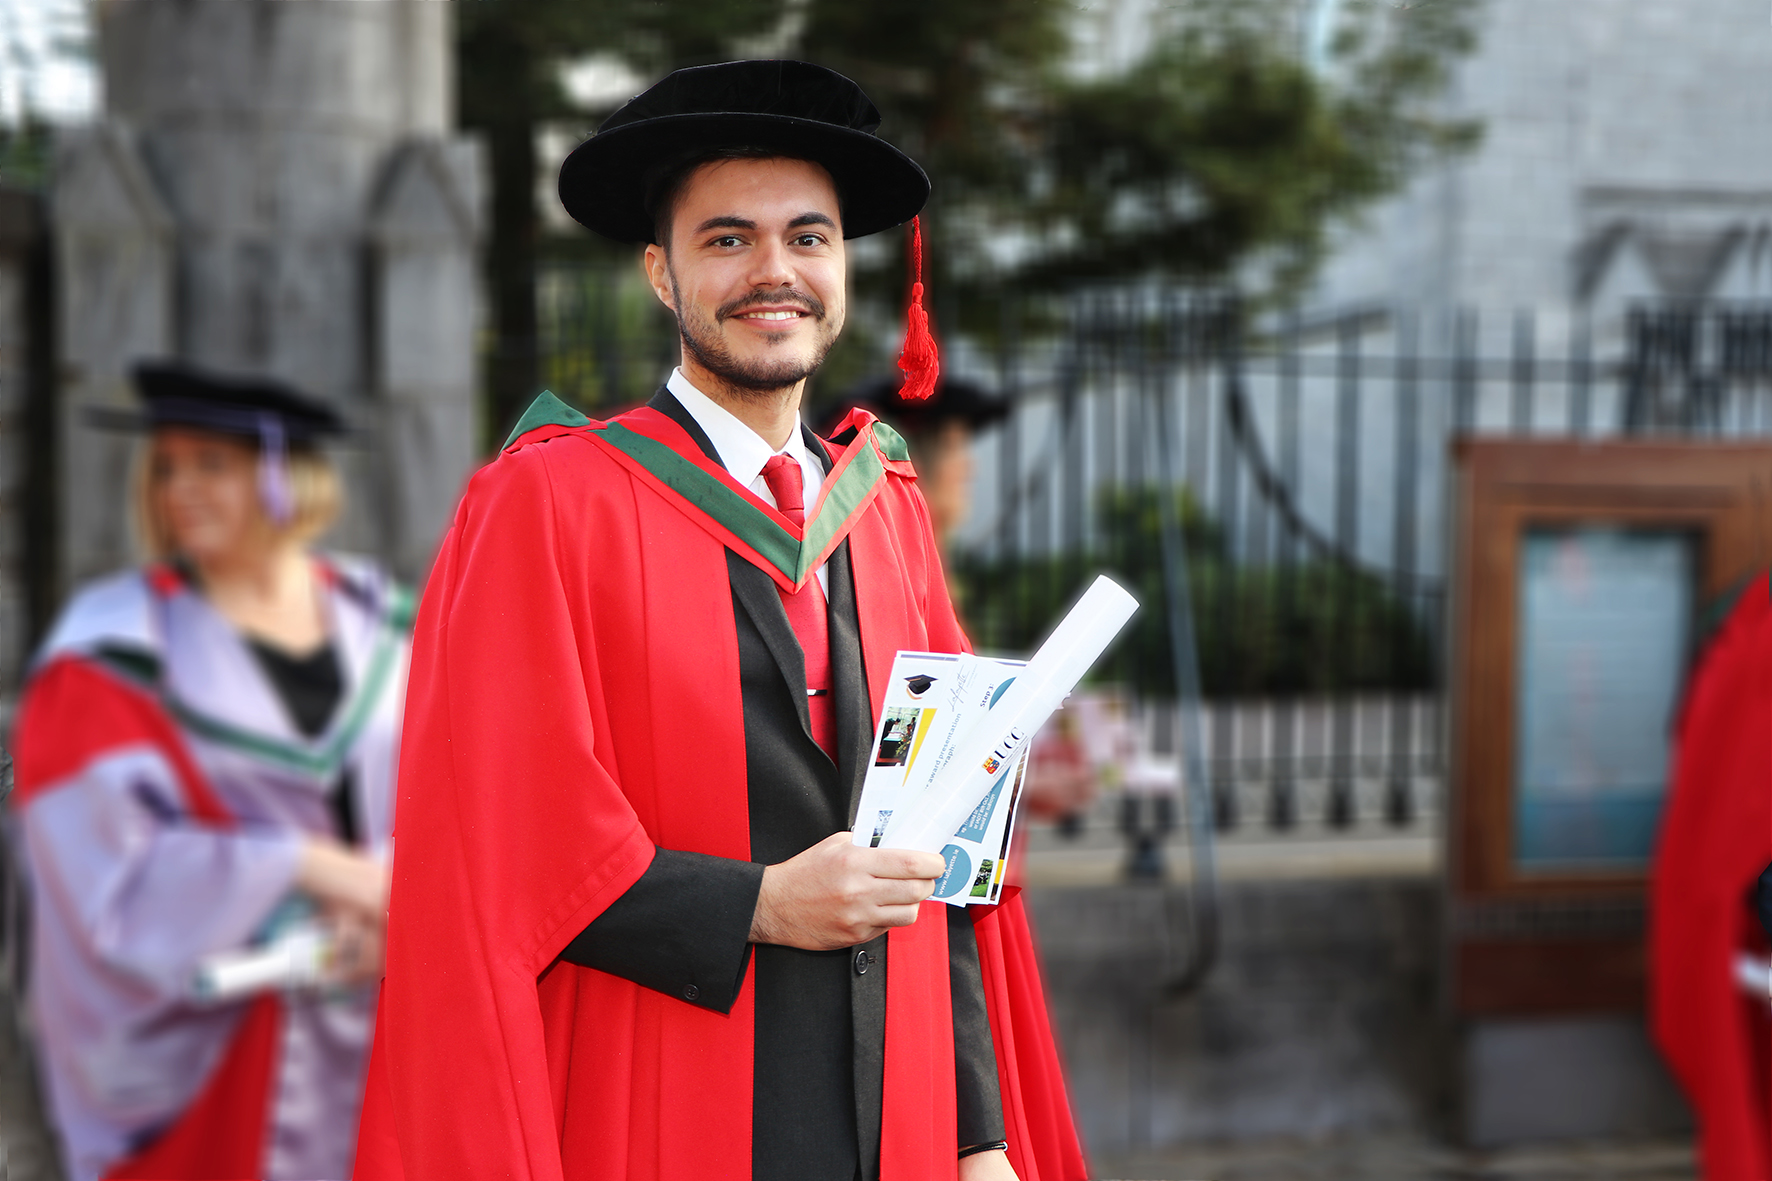 Science without Borders Dr Brunno Levone graduates with PhD in Neuroscience